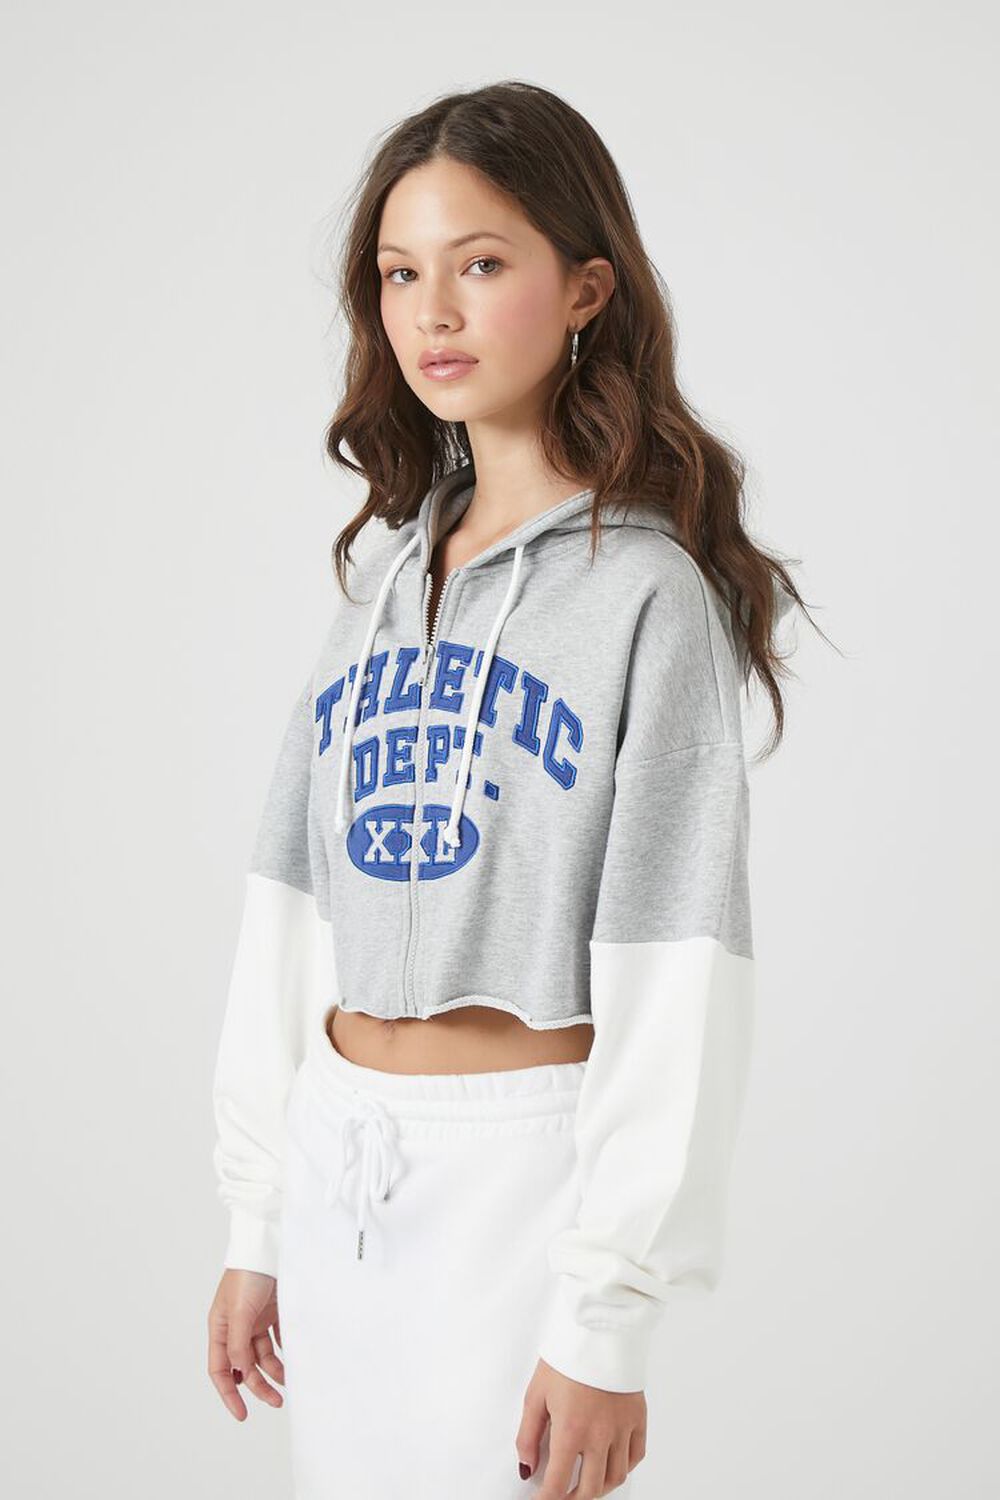 Forever 21 Boston Graphic Cropped Zip-Up Hoodie - ShopStyle